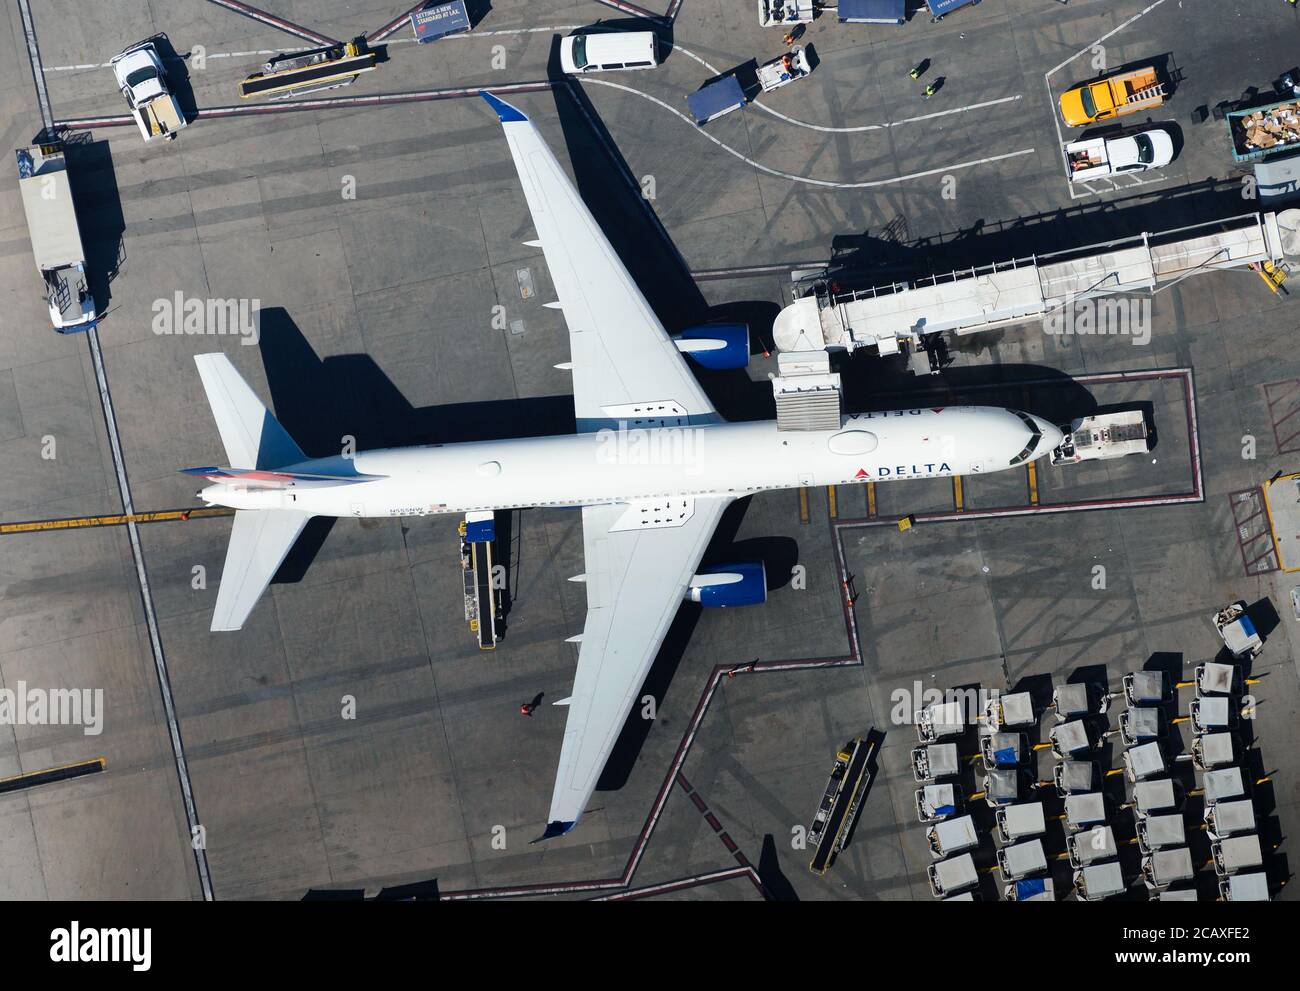 Delta Airlines Boeing 757 at LAX airport connected to jet bridge aerial view. Ground equipment visible around Delta B757 / 757-200. Stock Photo